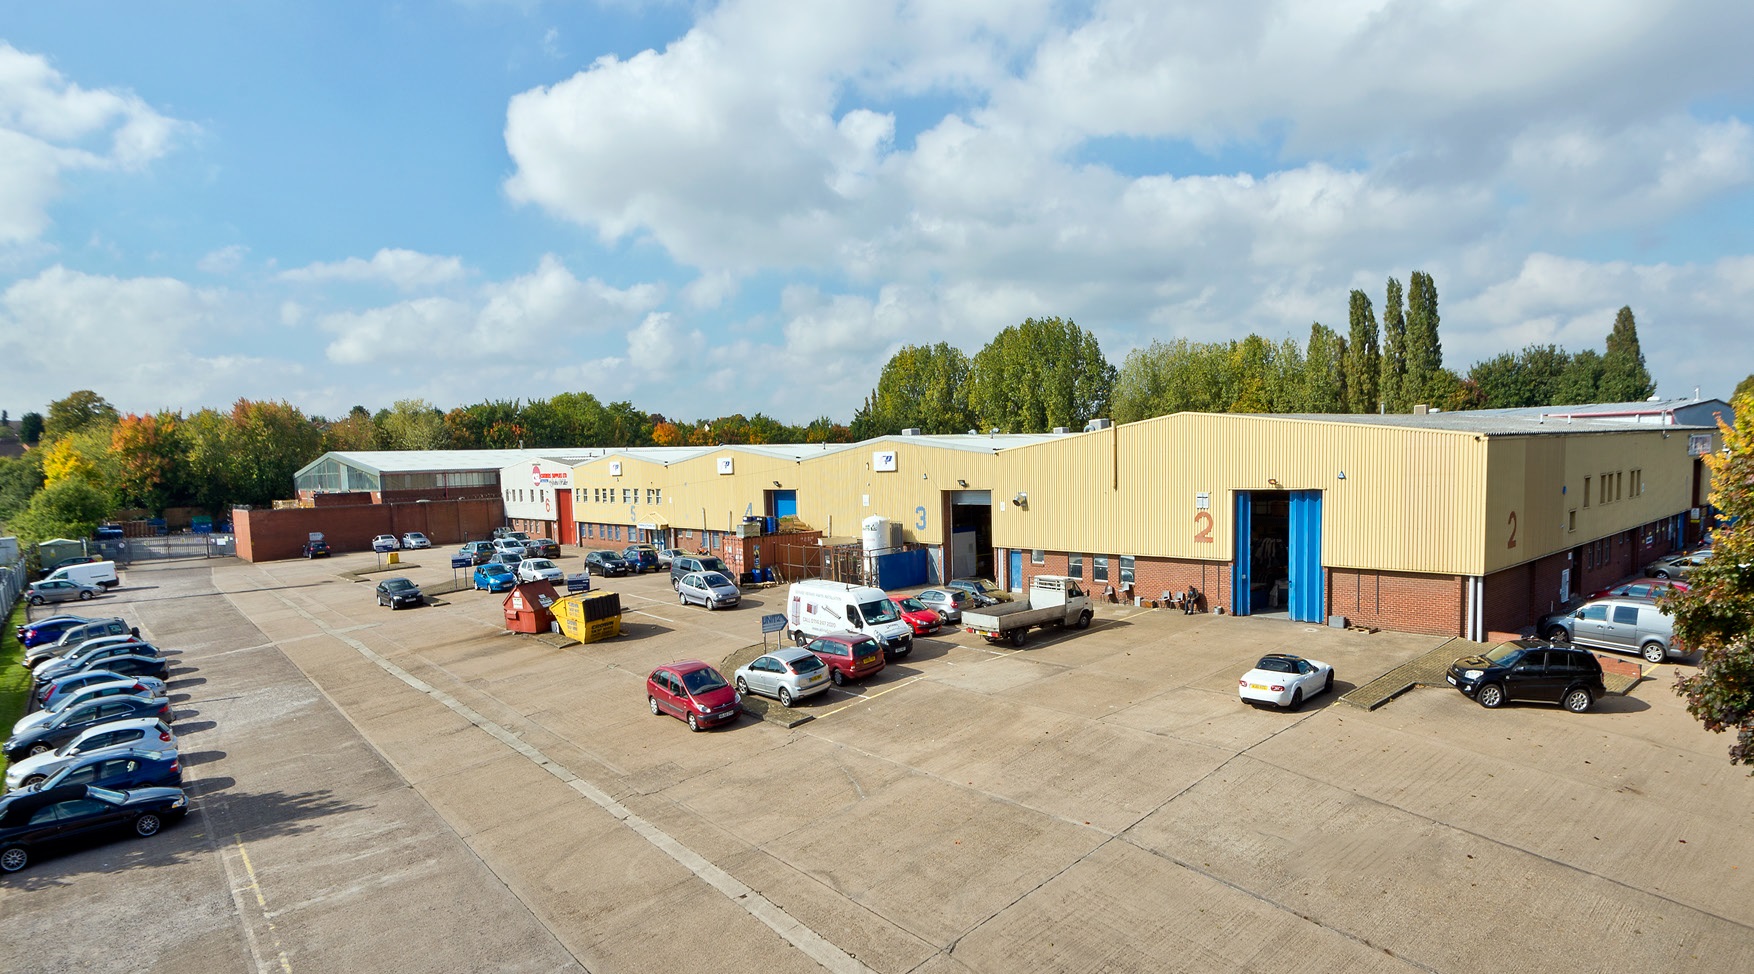 Sale of a multi let industrial estate, Centrovell Trading Estate